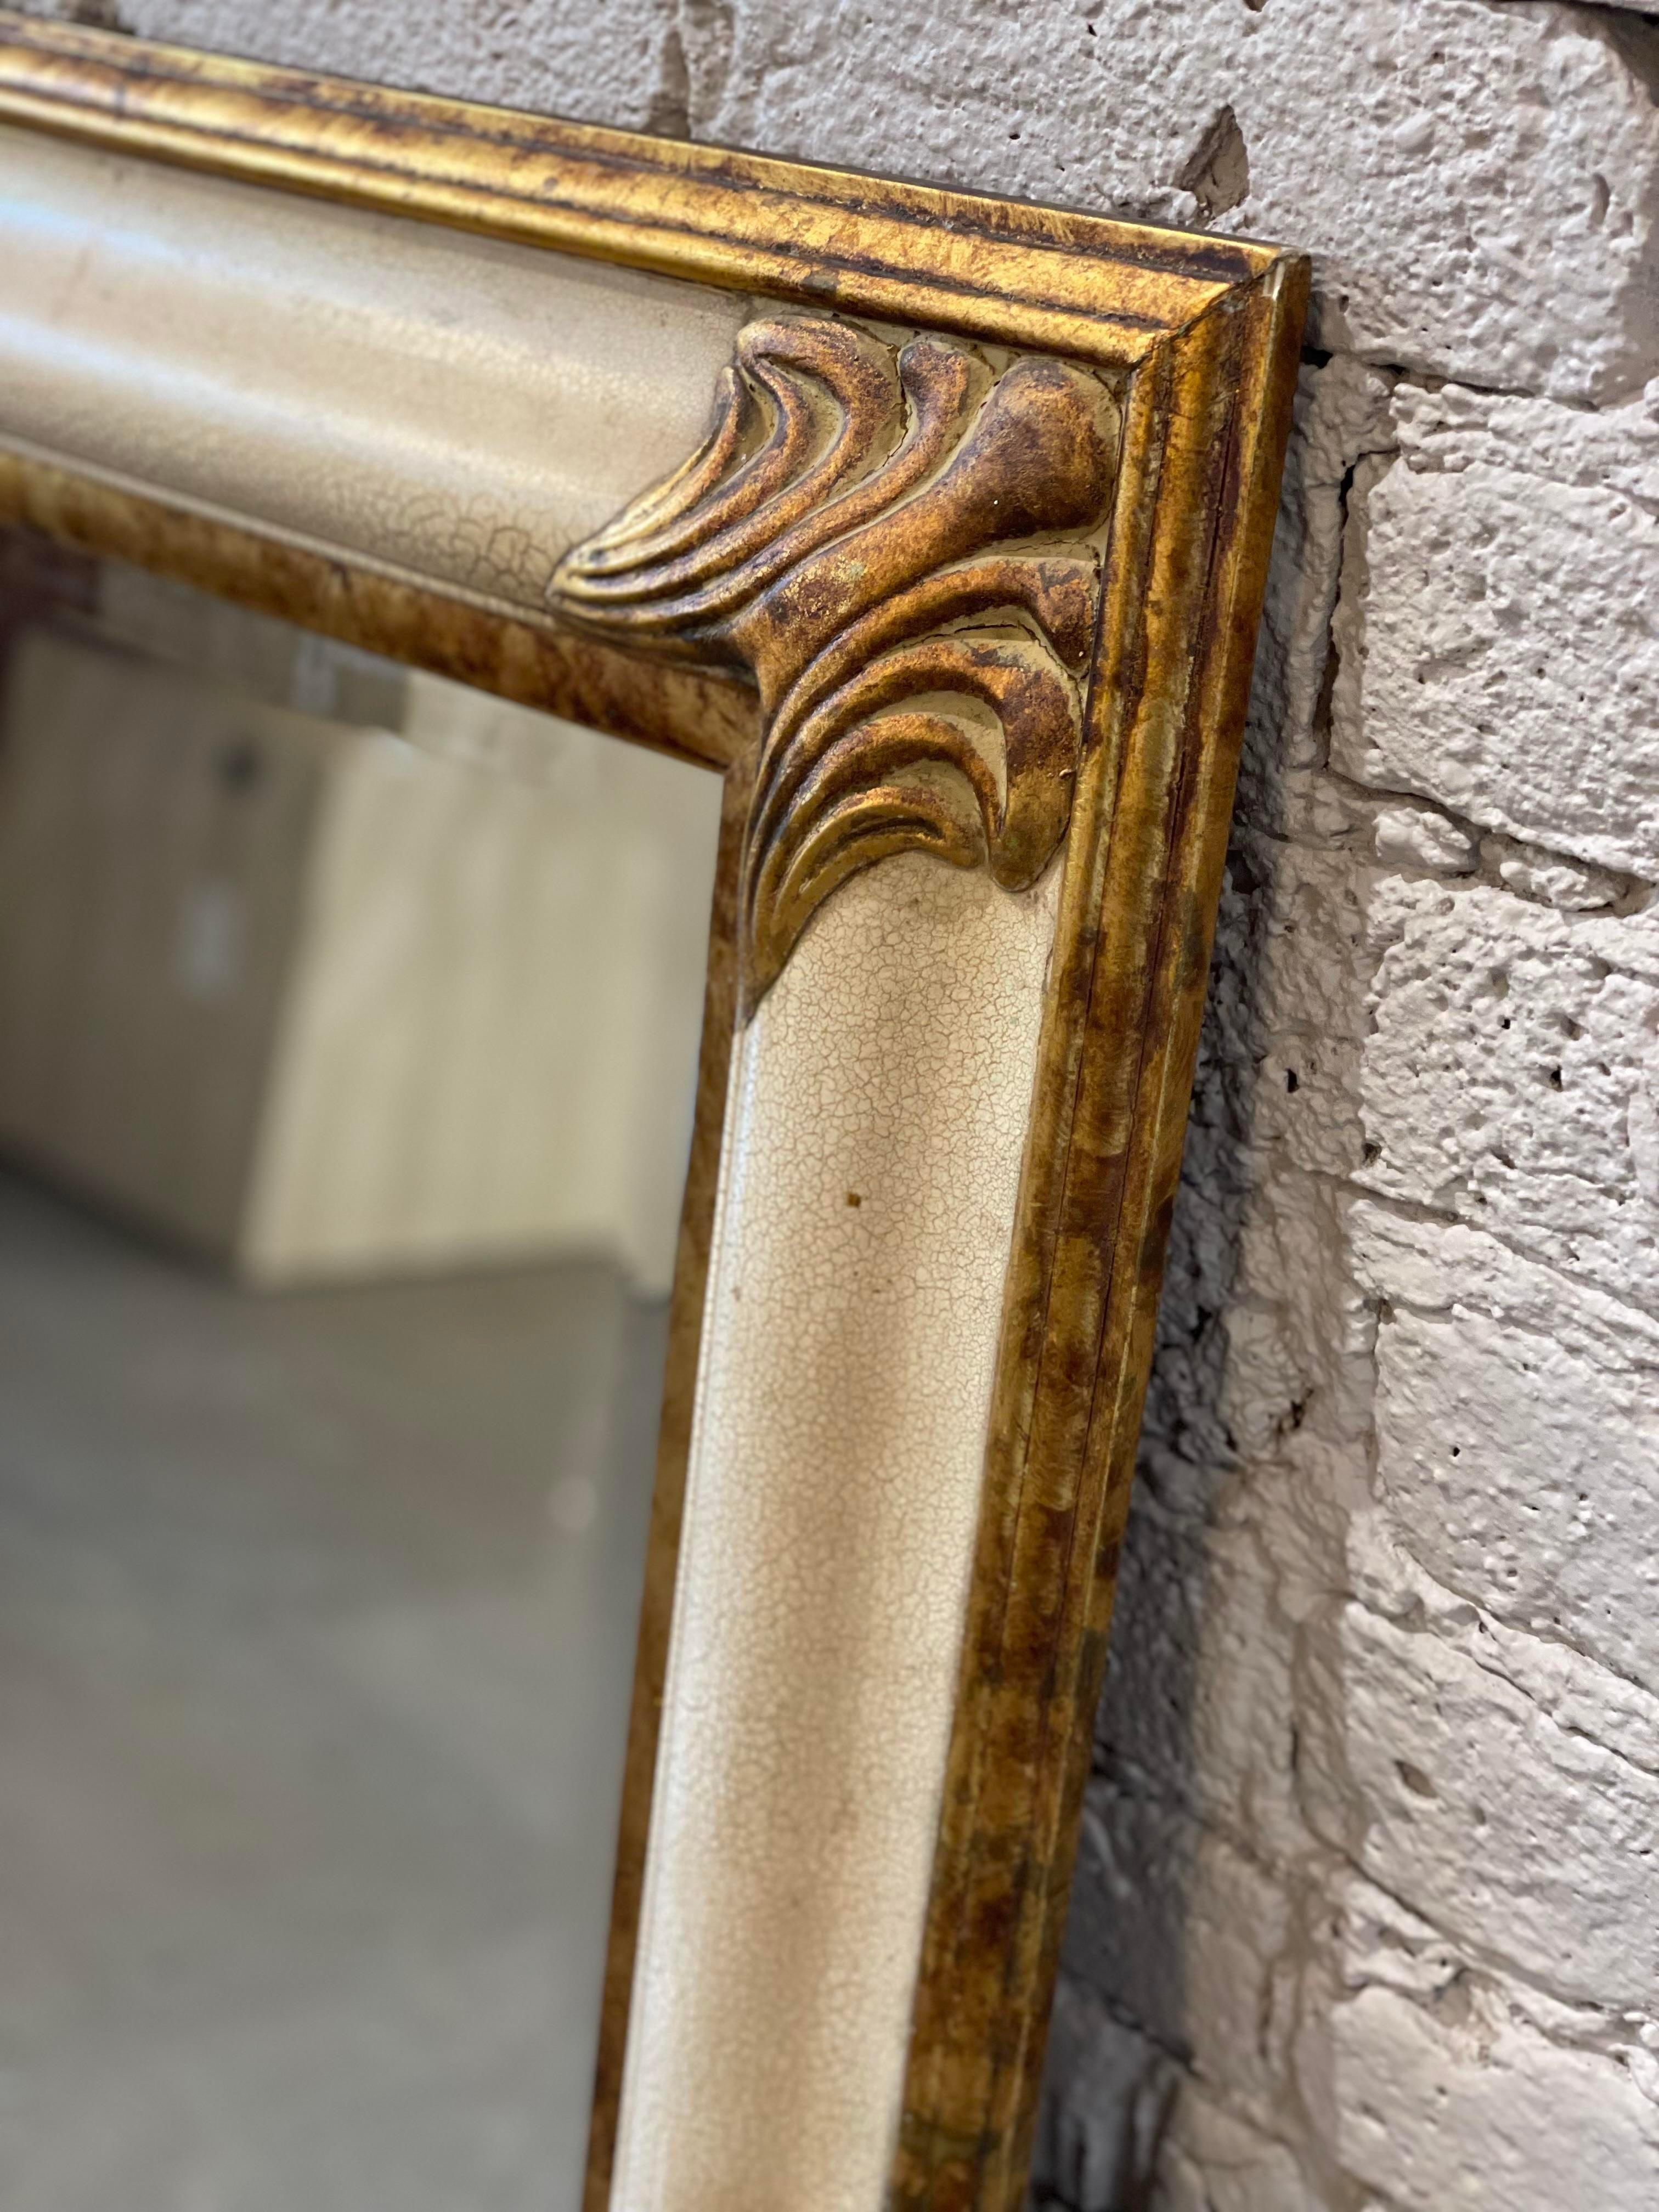 Beautiful vintage mirror with gold details and a creamy milk crackled paint finish. Can be oriented vertically or horizontally.